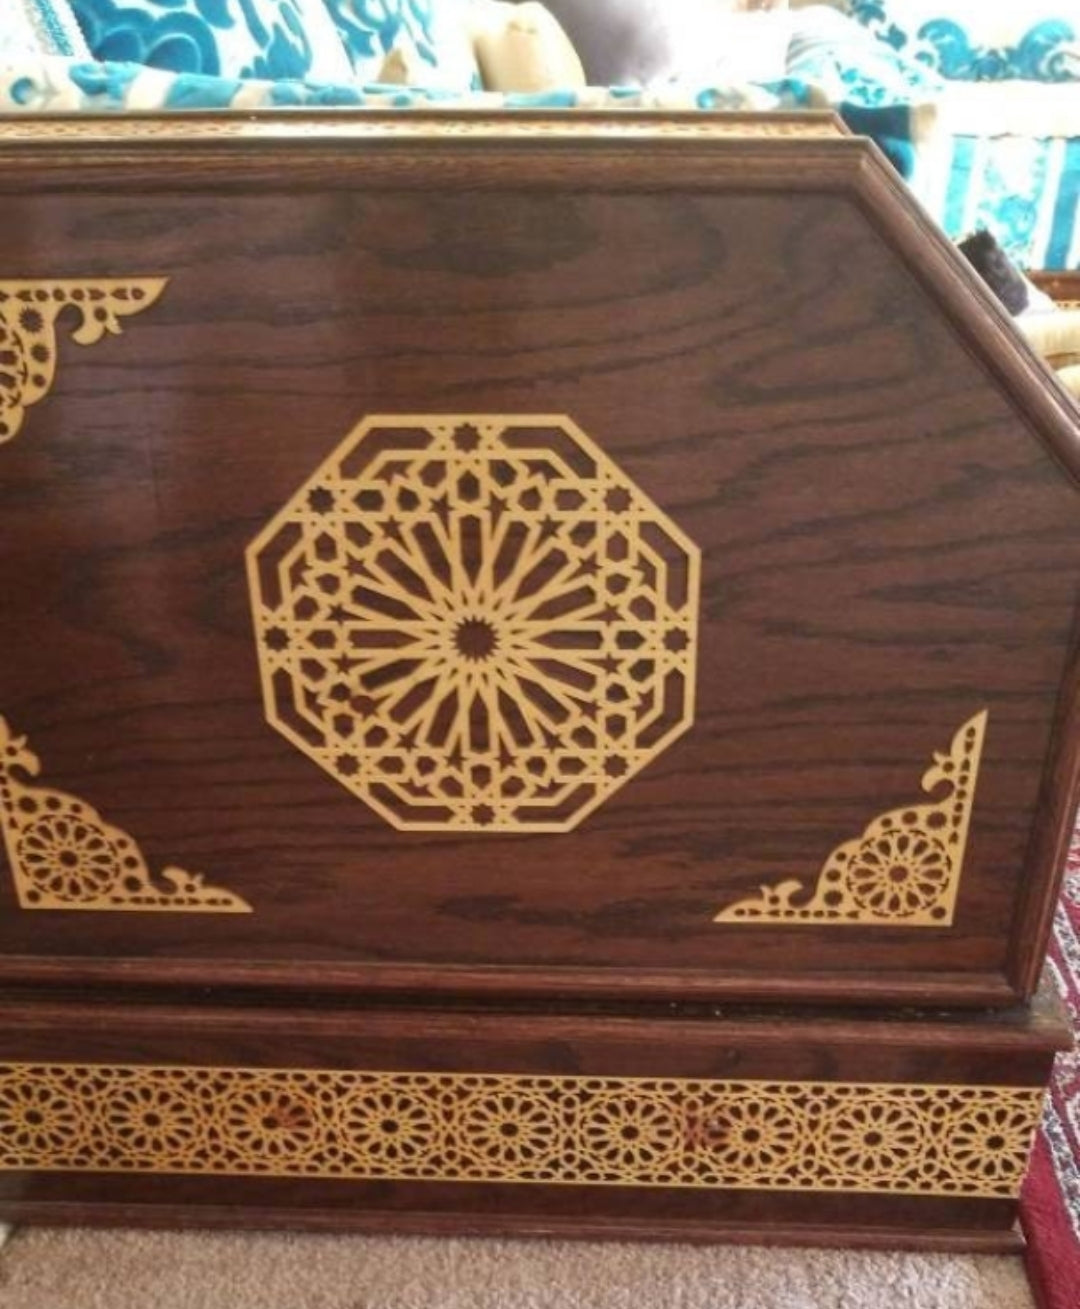 C-001/ Corners Accessory / Moroccan Geometric Art / Carved Wood / laser cut wood / Moroccan Arabesque / craft and diy / zowaqa maghribia